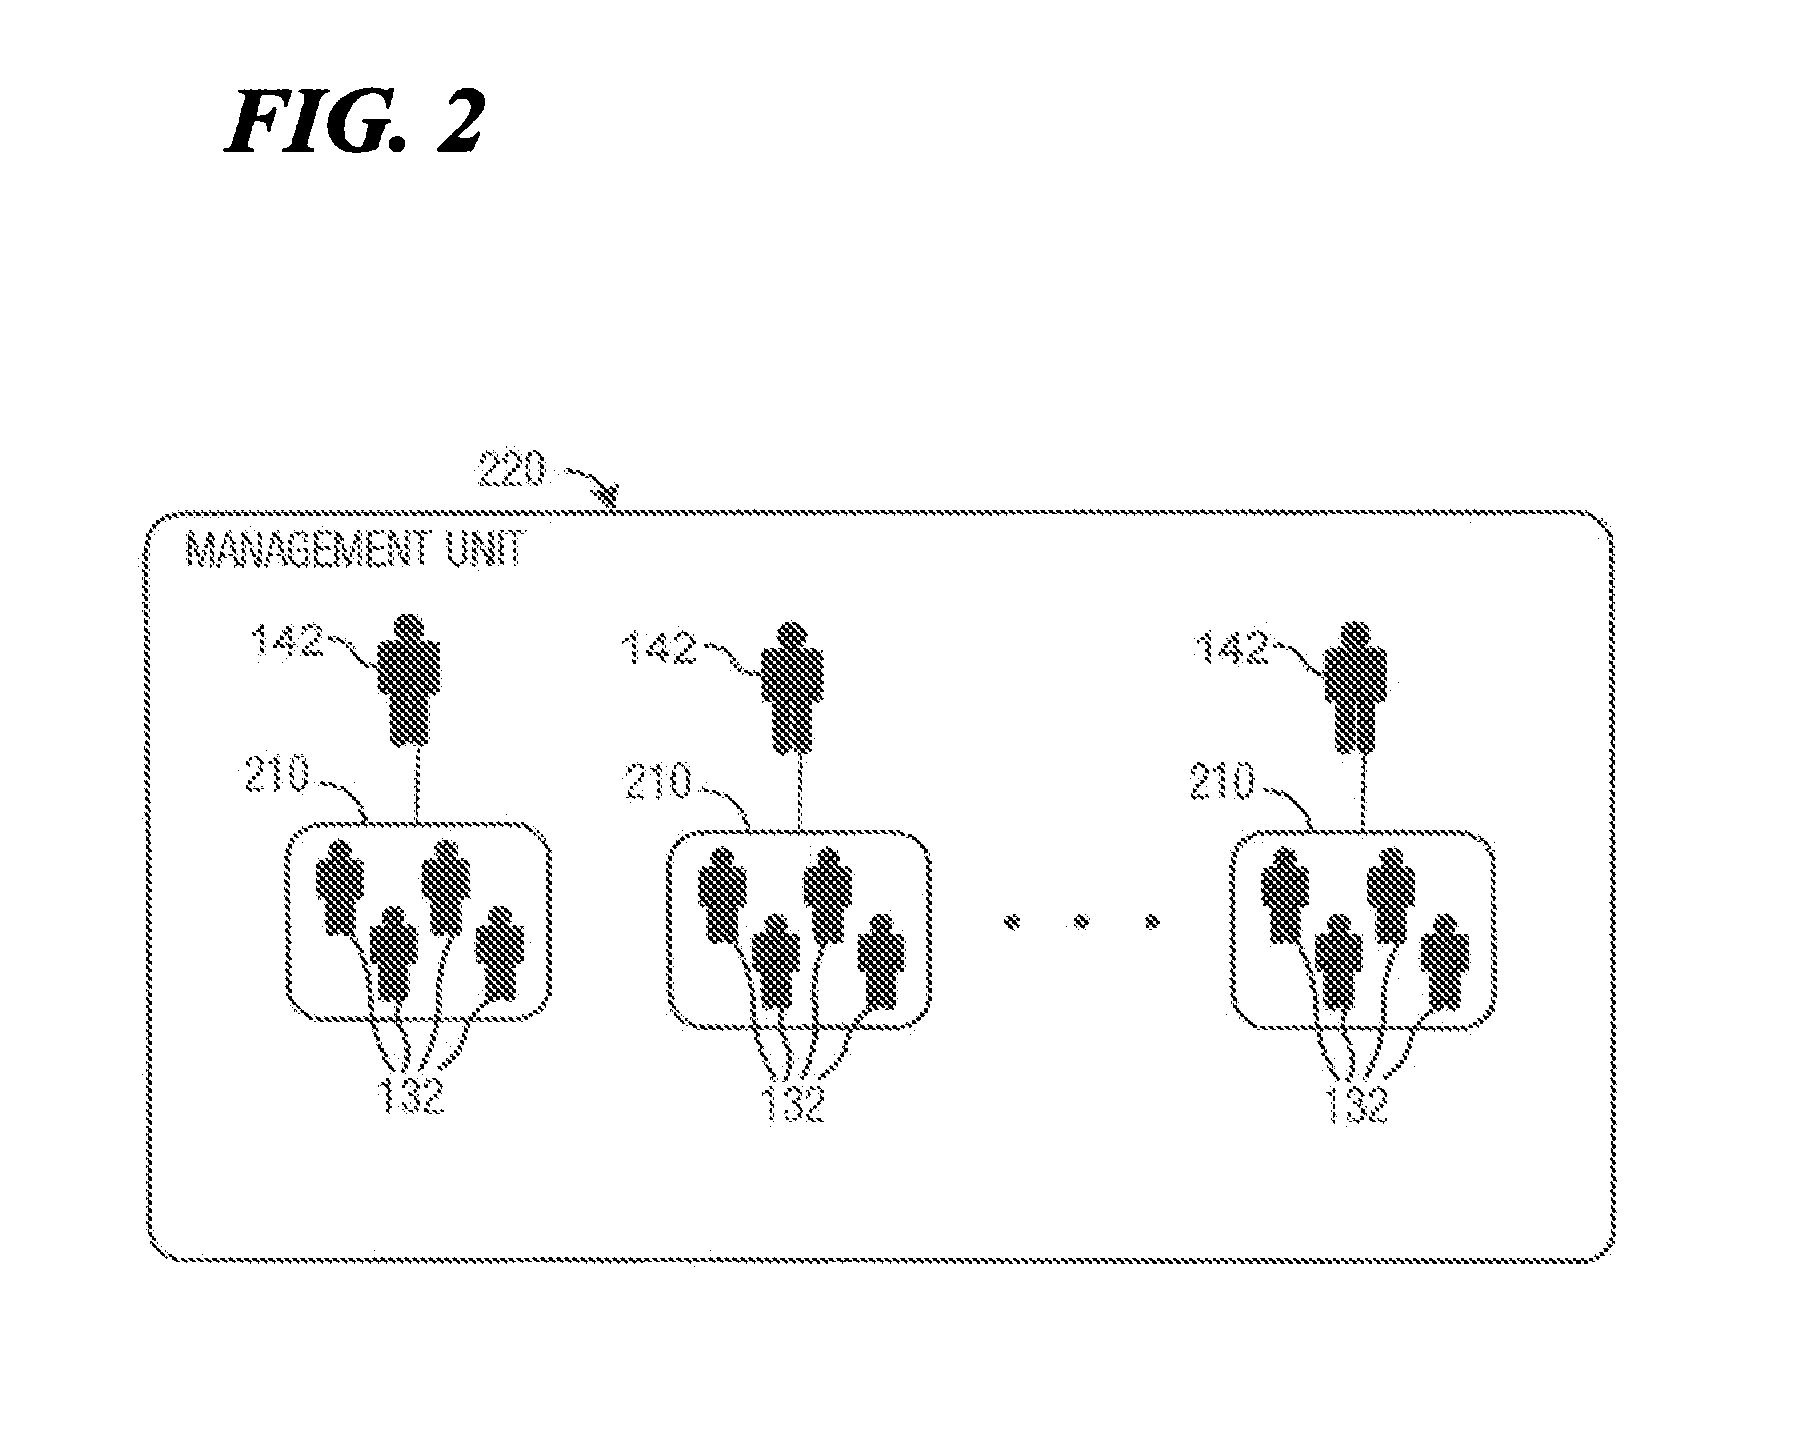 Method and system for providing performance statistics to agents